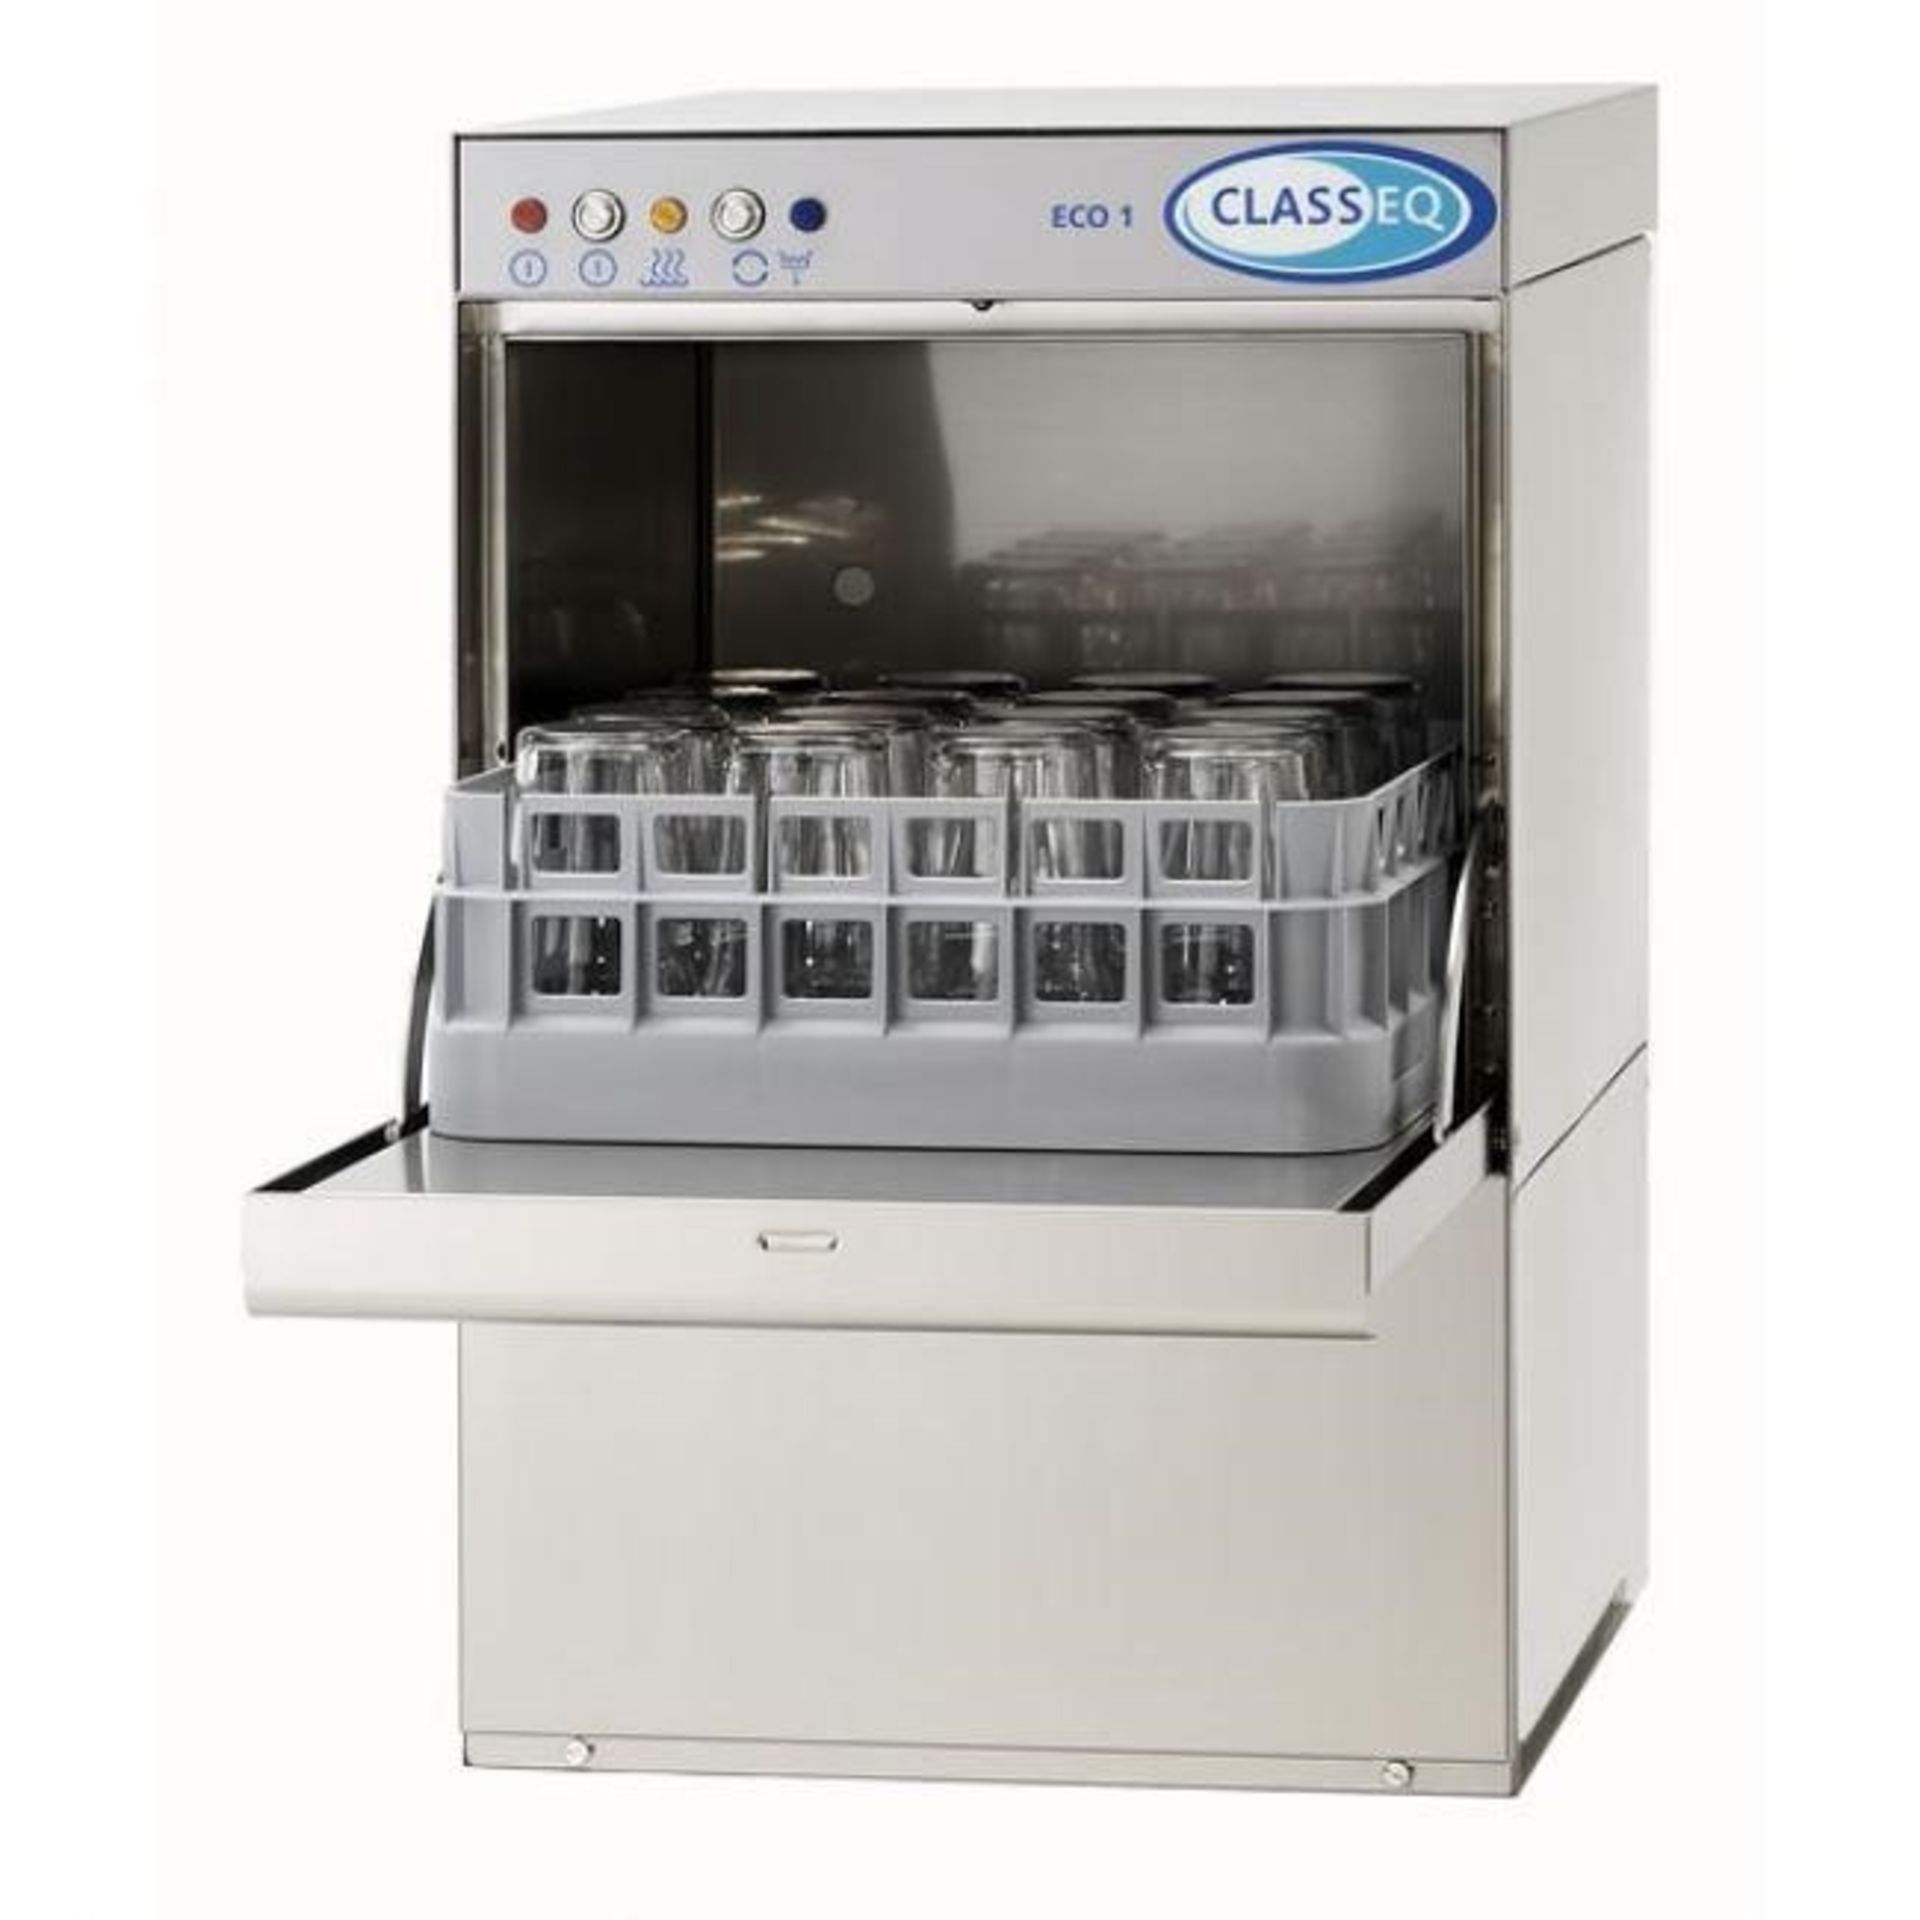 1 x CLASSEQ ECO 1 12-Pint Commercial Diswasher - Stainless Steel Finish - Ref: MT720 - CL011 - Locat